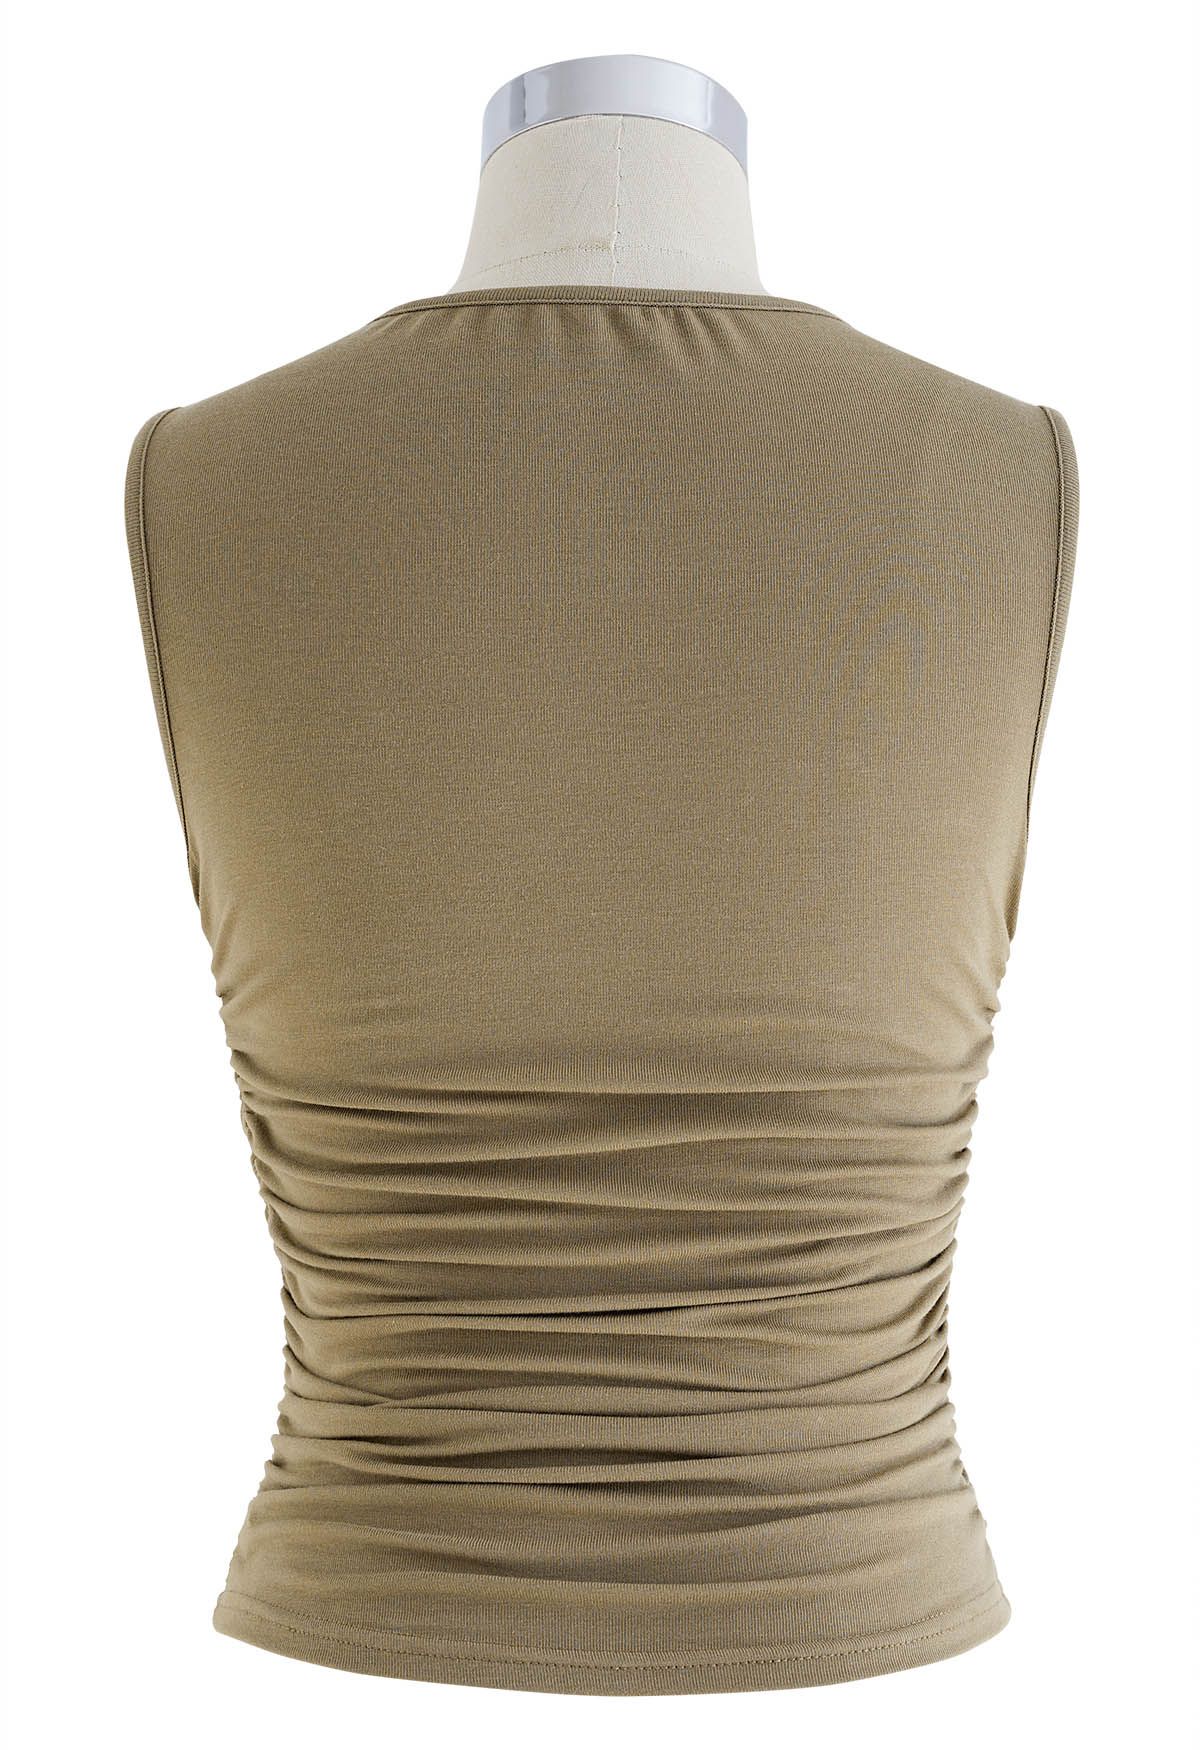 Faux-Wrap Ruched Sleeveless Top in Khaki